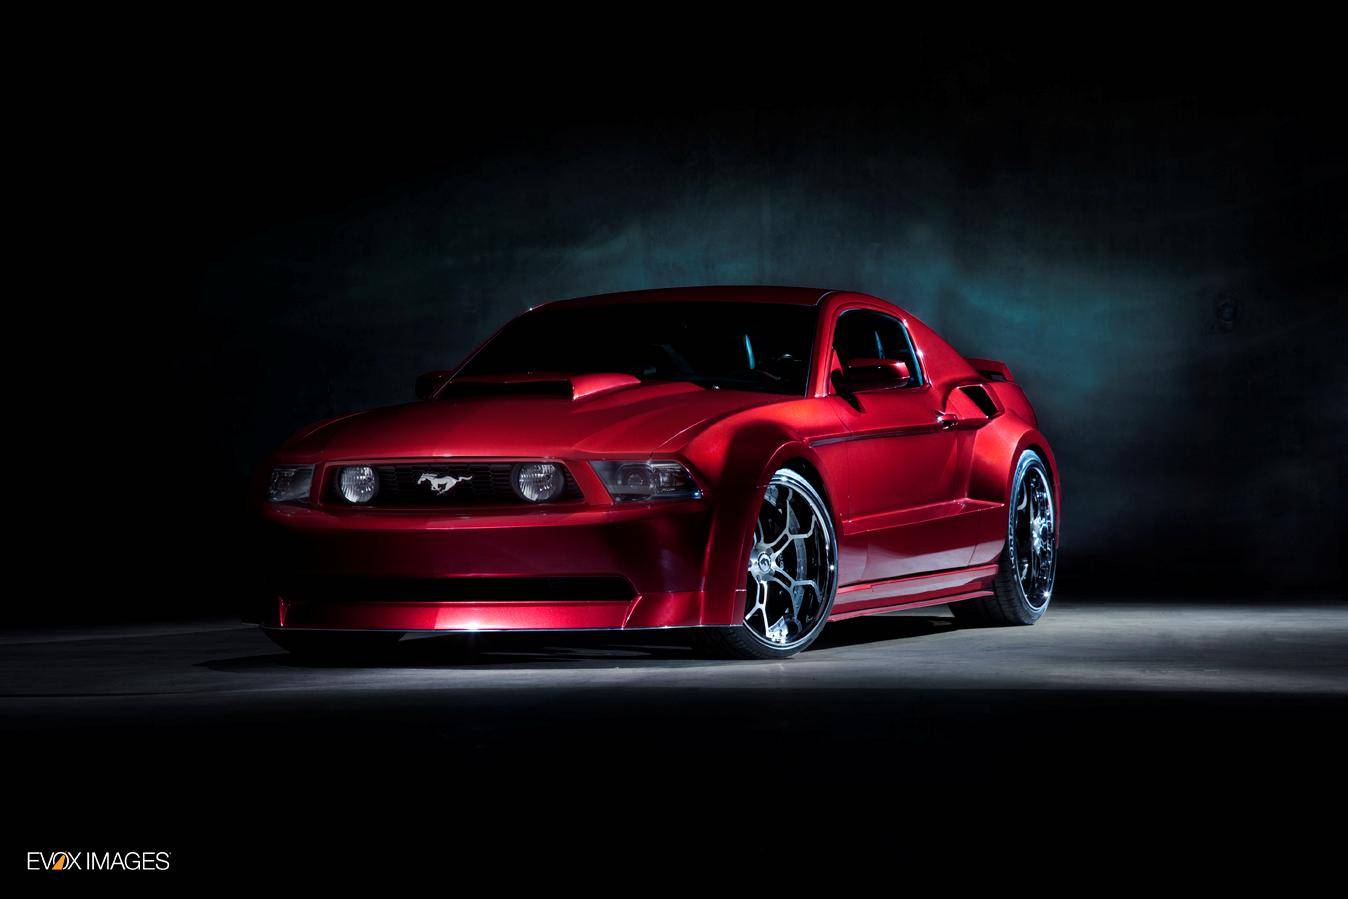 2014 Mustang Wallpapers Top Free 2014 Mustang Backgrounds Wallpaperaccess